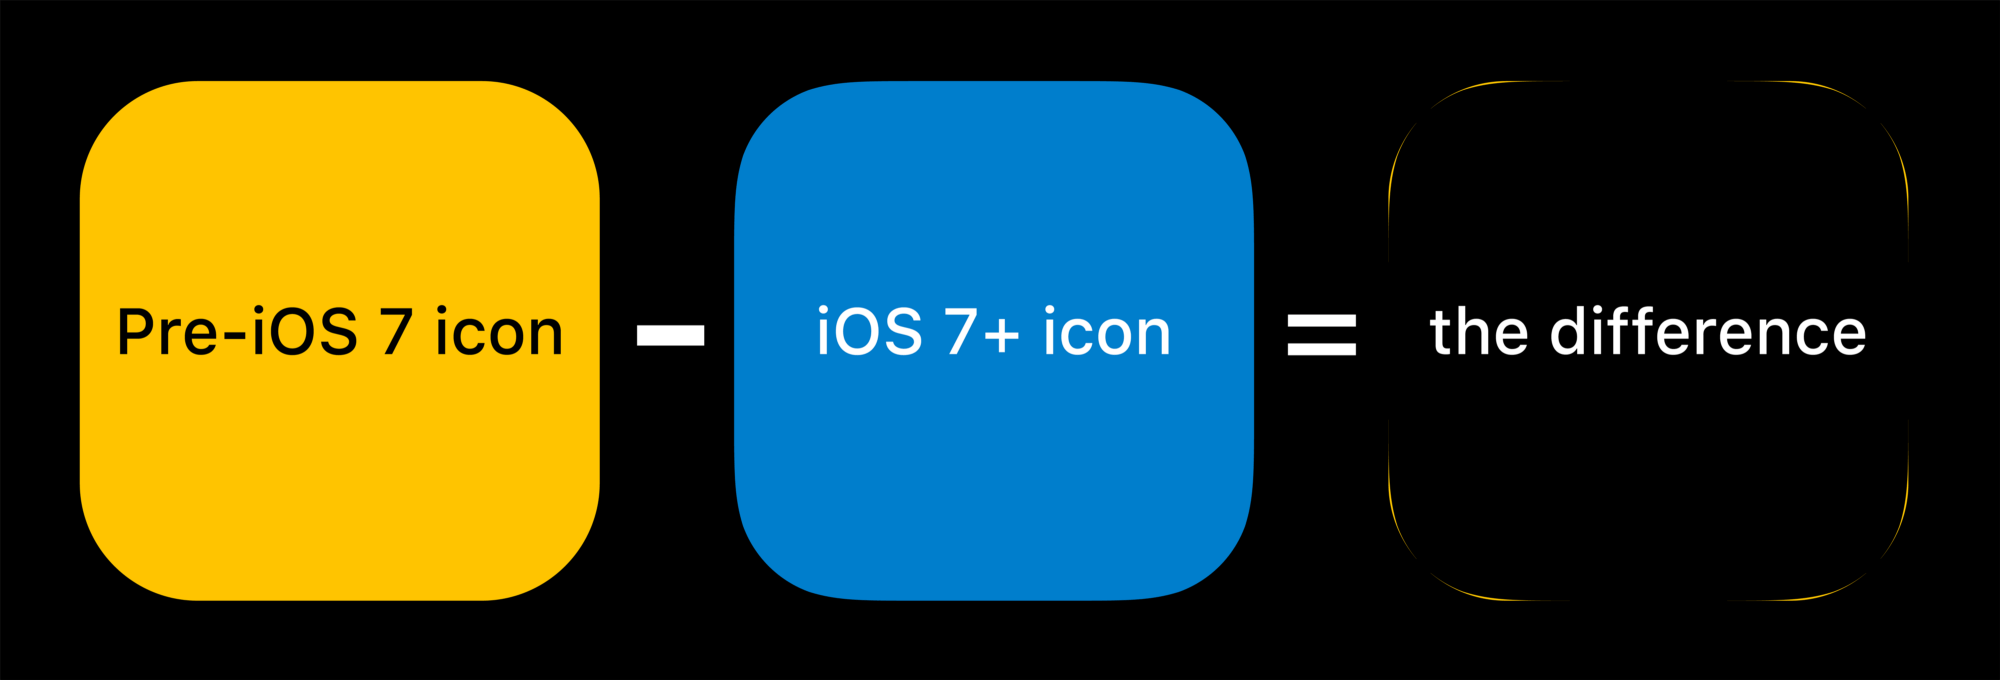 An image showing three shapes: 1) a pre-iOS7 shape, 2) a post-iOS7 shape, 3) the corner radii difference if the two shapes were subtracted from each other, showing small remaining corner spots from the pre-iOS7 shape.